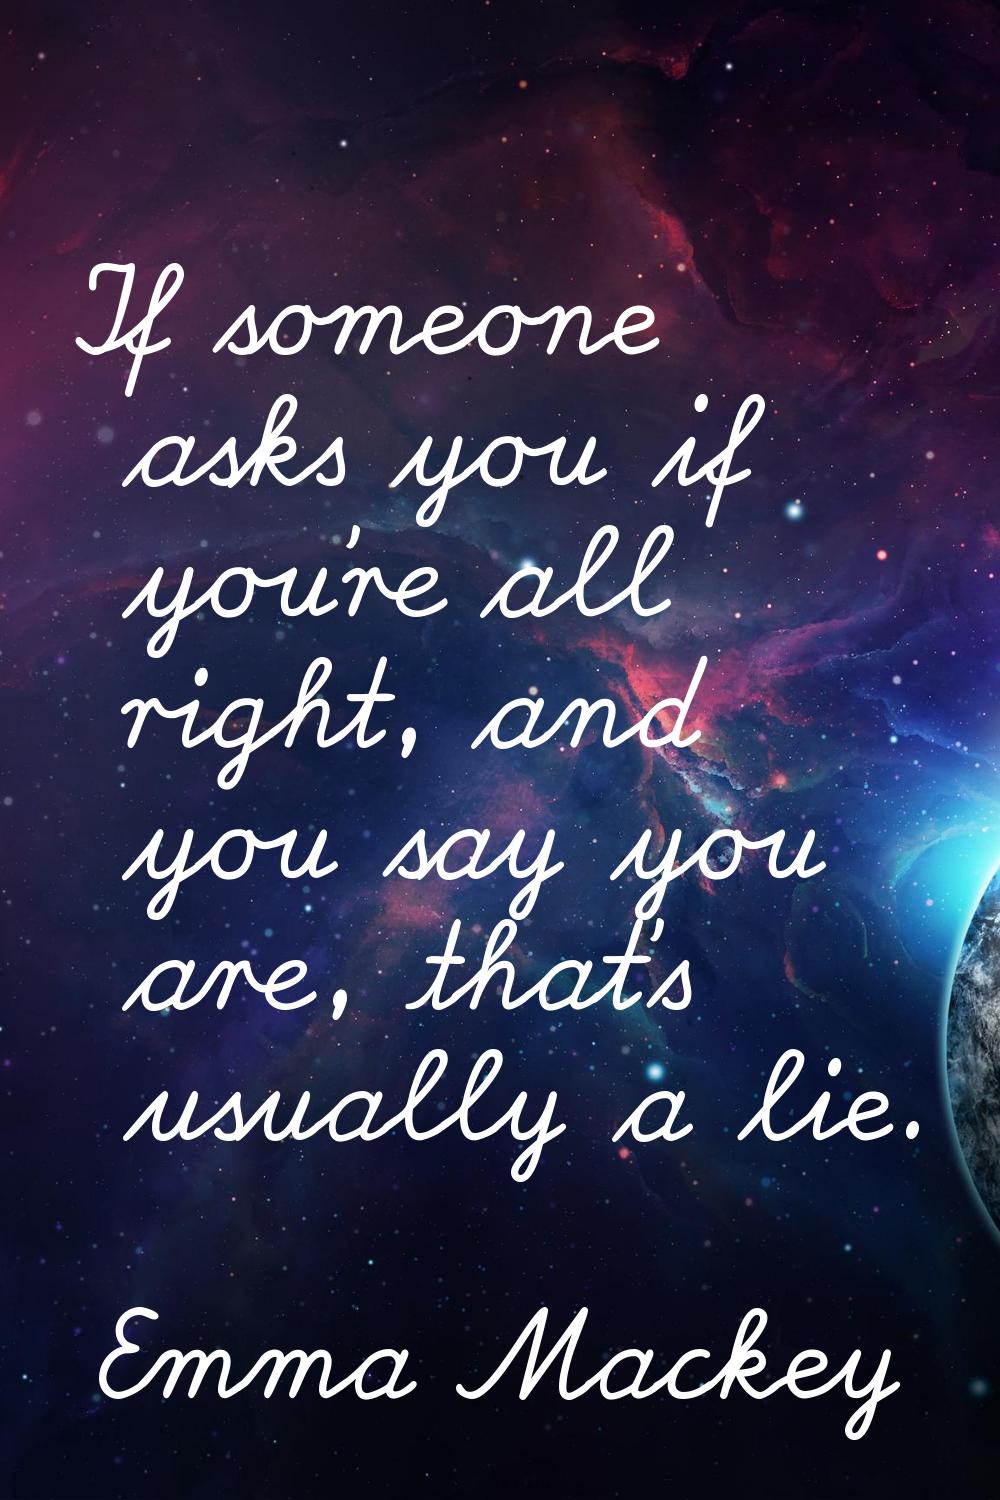 If someone asks you if you're all right, and you say you are, that's usually a lie.